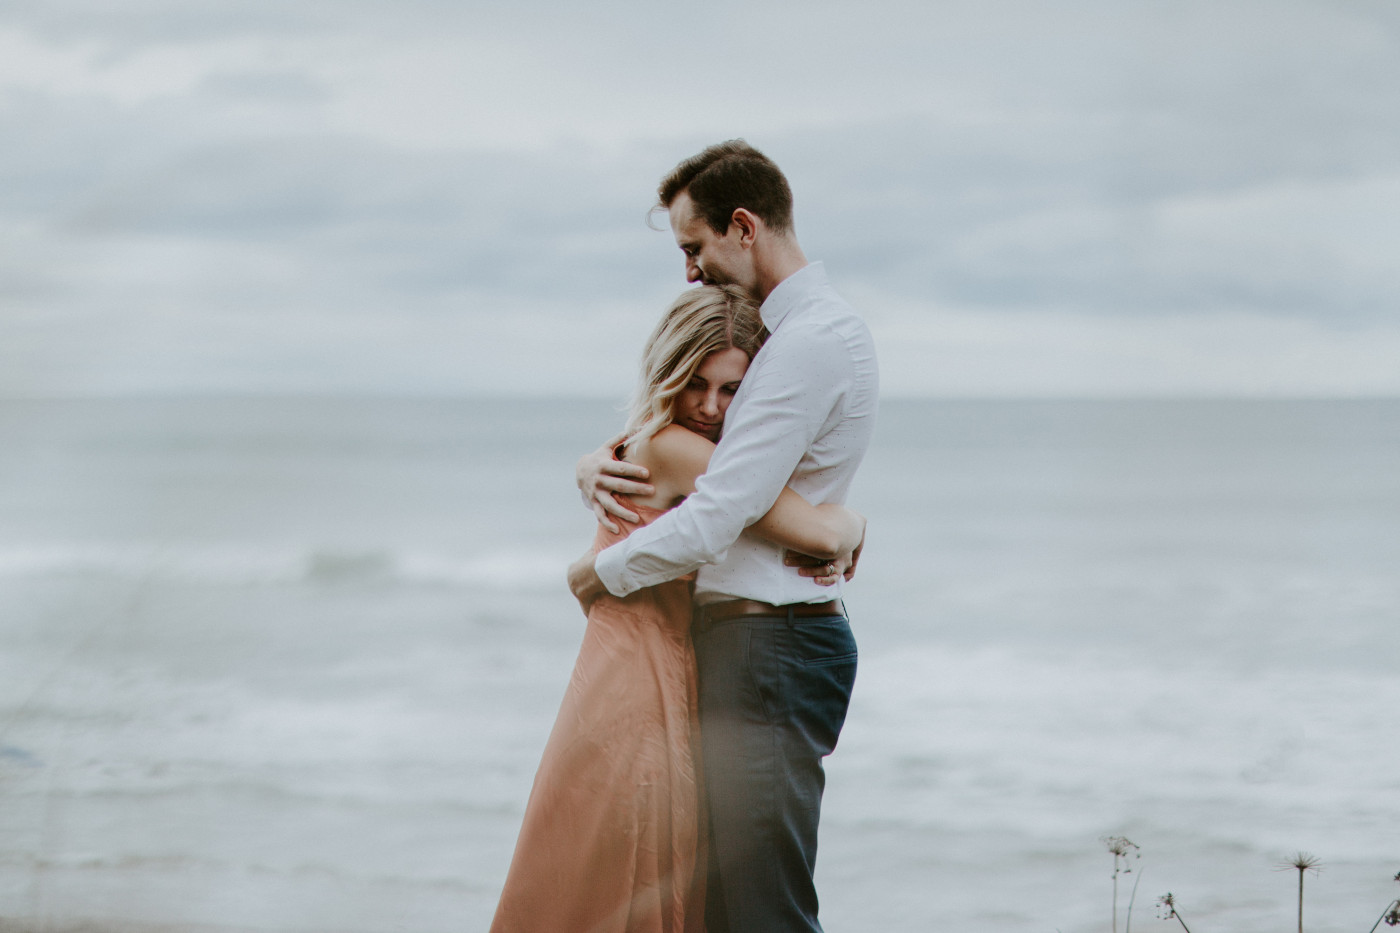 Billy and Chelsey hug at Cannon Beach. Elopement wedding photography at Cannon Beach by Sienna Plus Josh.